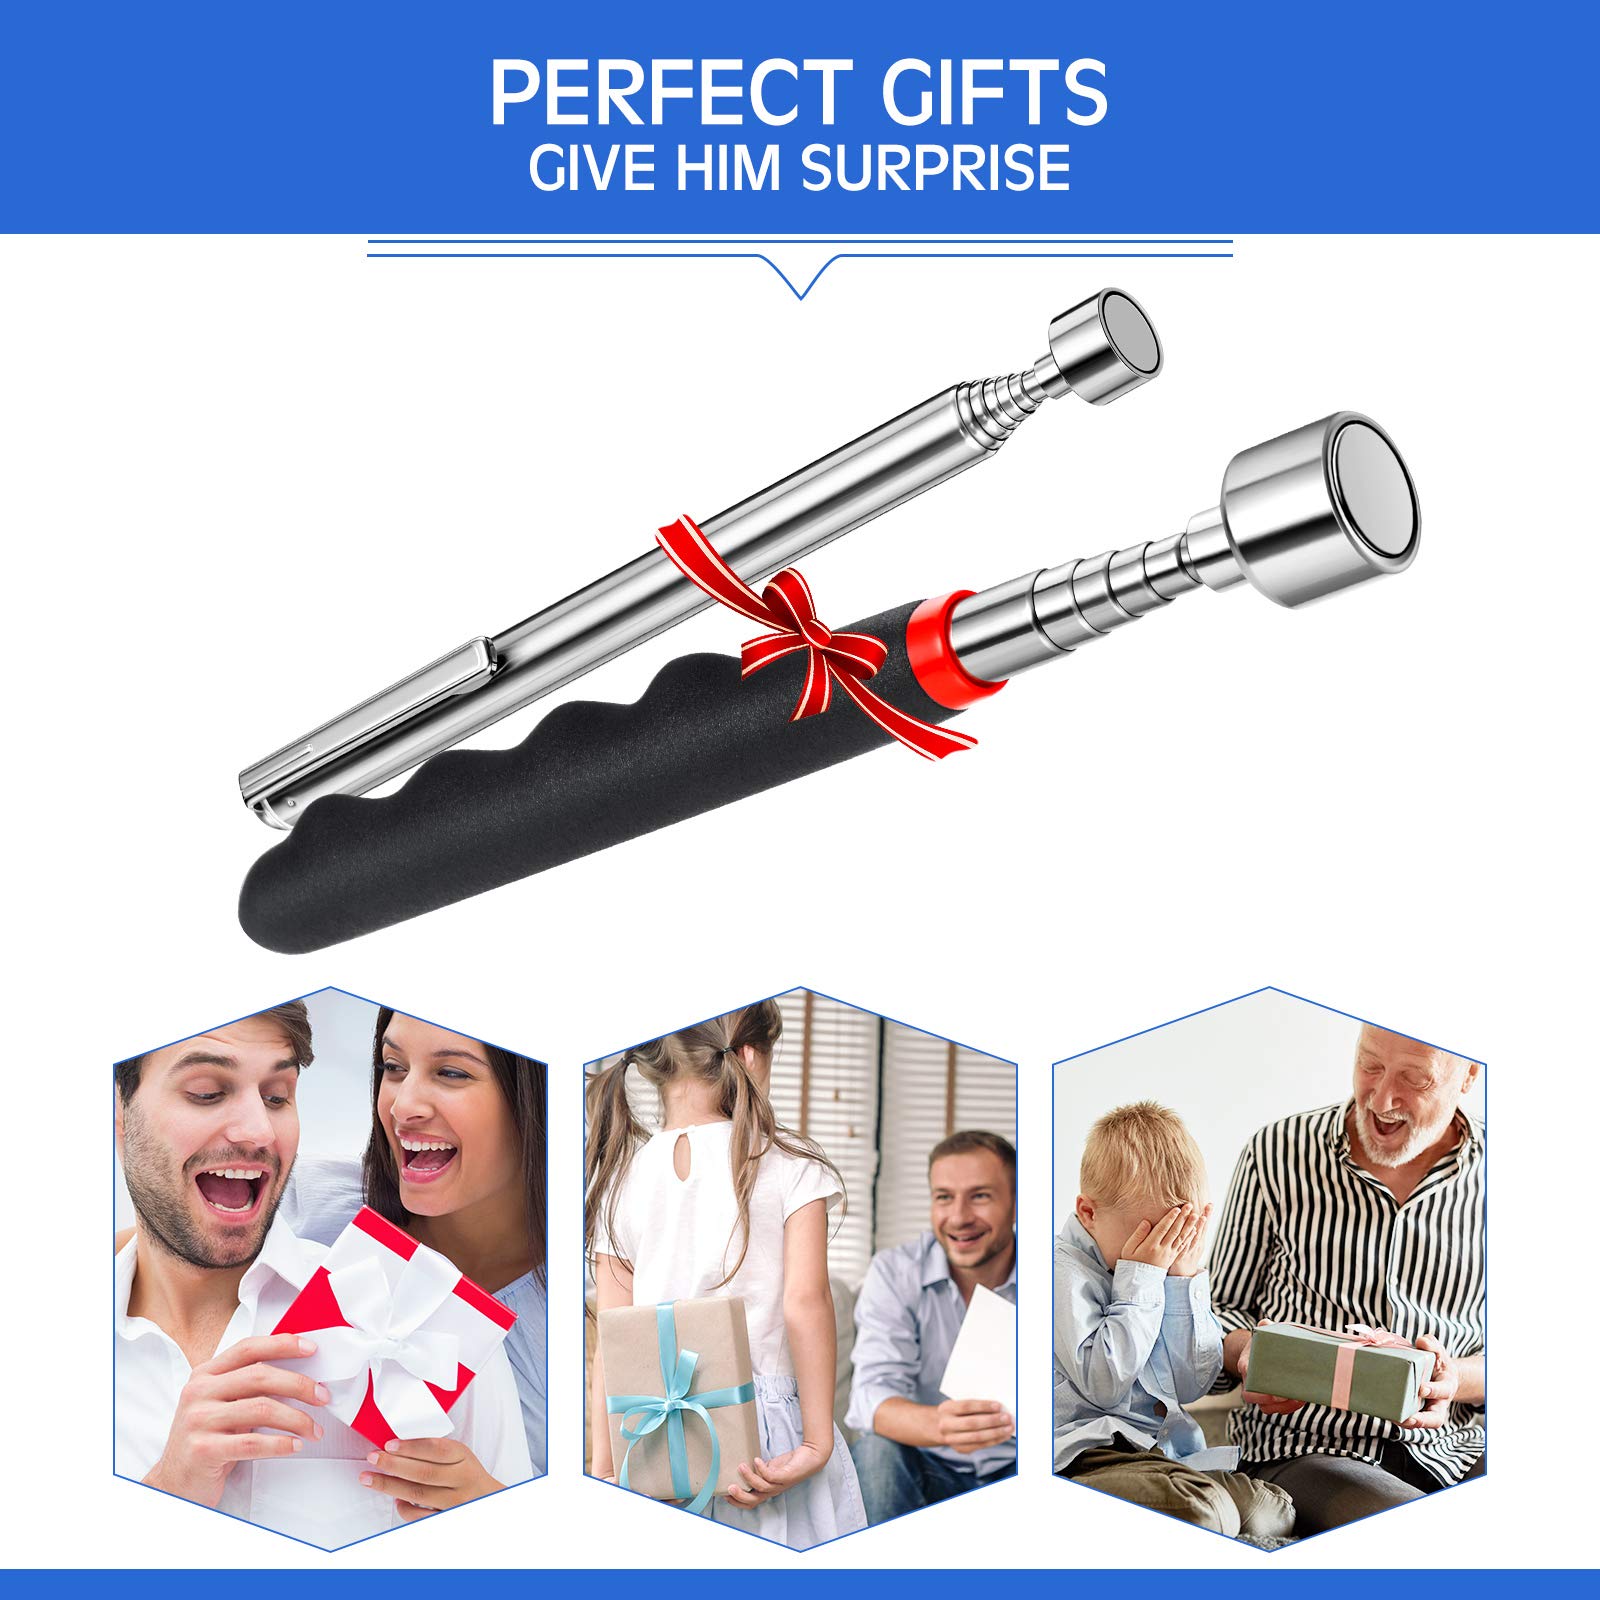 Telescoping Magnet Pick up Tools Include 20 lb Magnetic Tool and 3 lb Telescoping Magnet Stick Gadget for Hard to Reach Places Suitable for Birthday Father’s Day and Christmas (2)